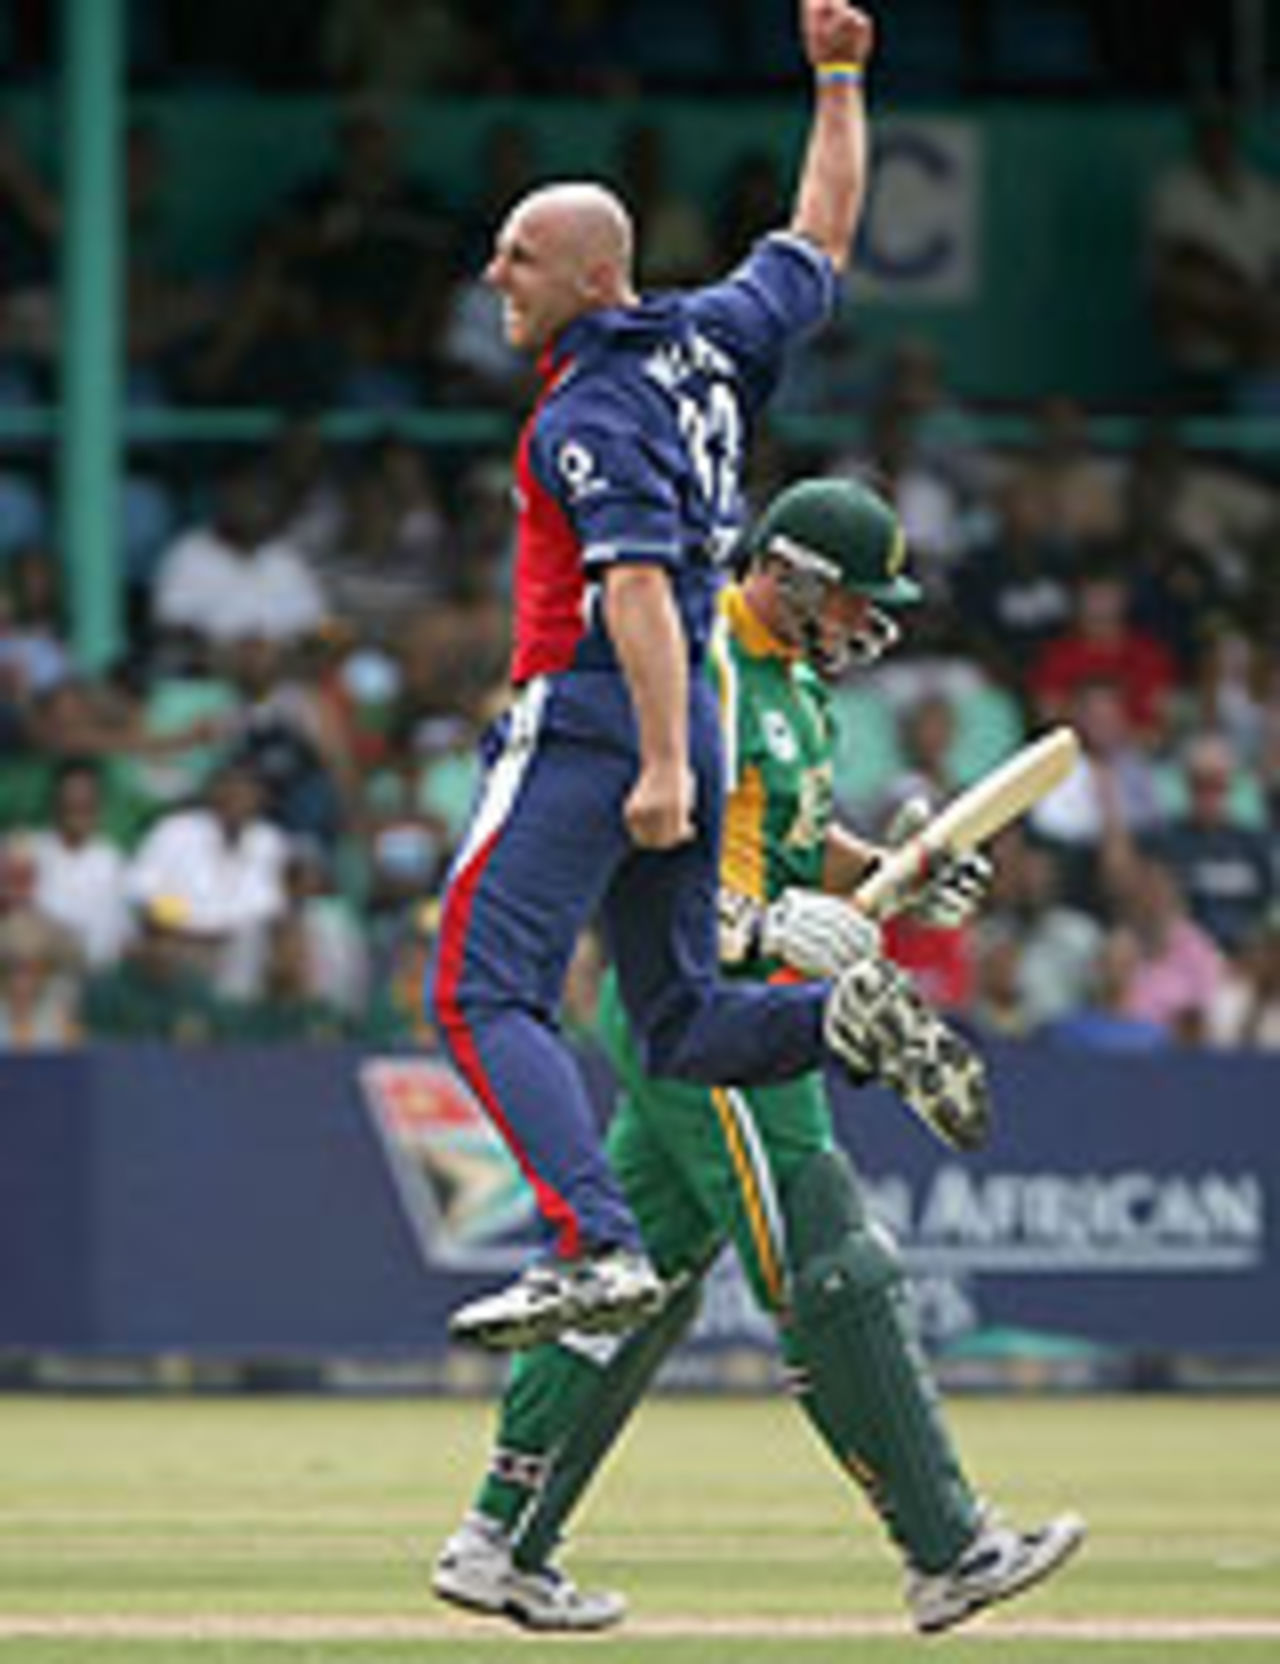 Alex Wharf leaps in triumph as Graeme Smith falls early, in the sixth one-day international at Durban, South Africa v England, February 11, 2005